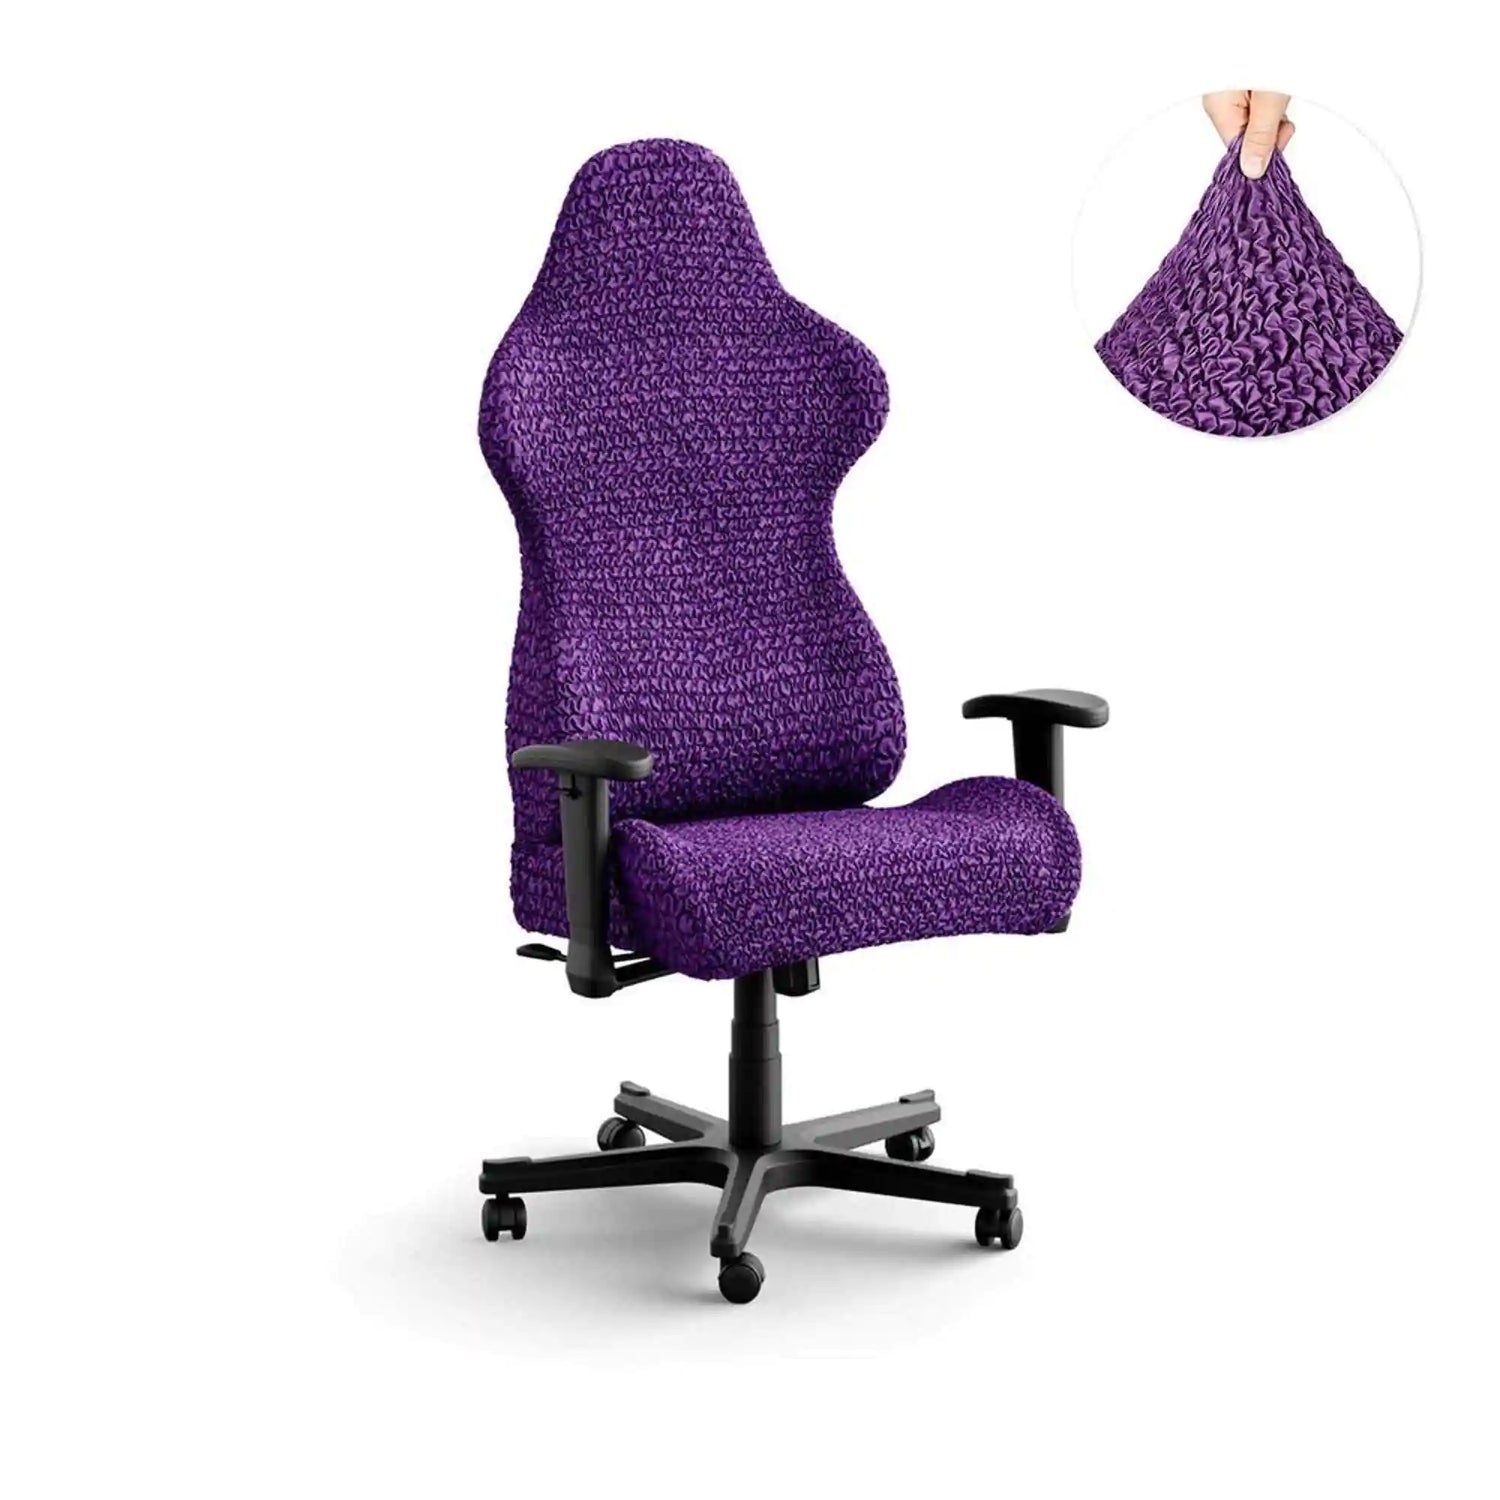 OFFICE/GAMING CHAIR COVER